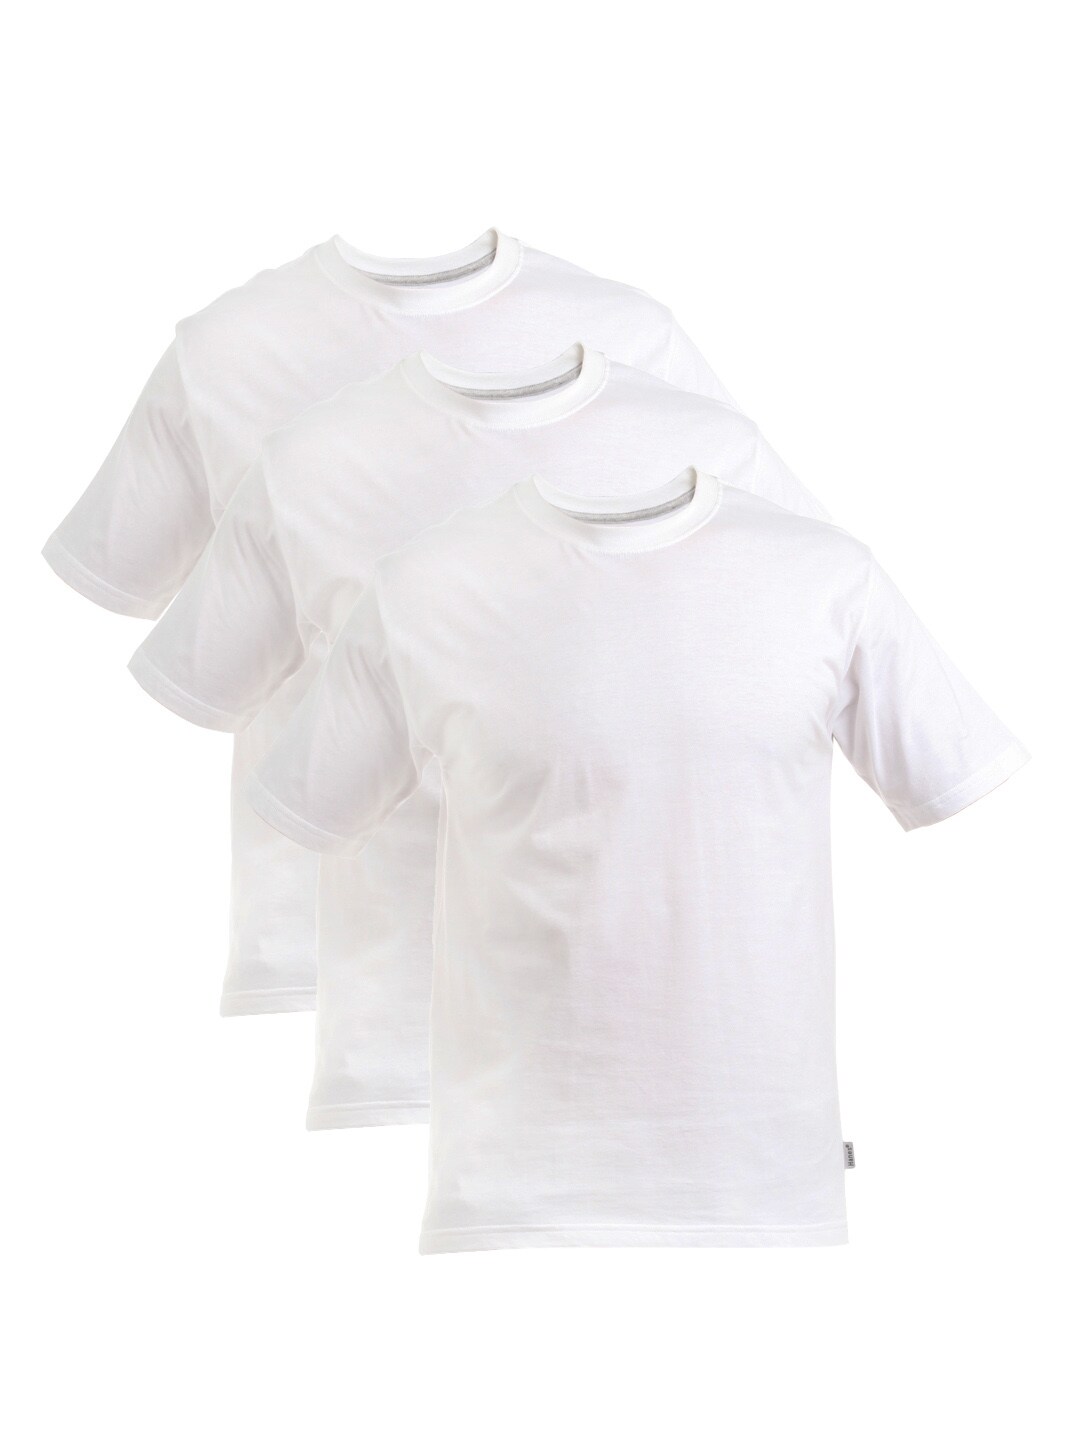 Hanes Men White Pack of 3 T-shirts